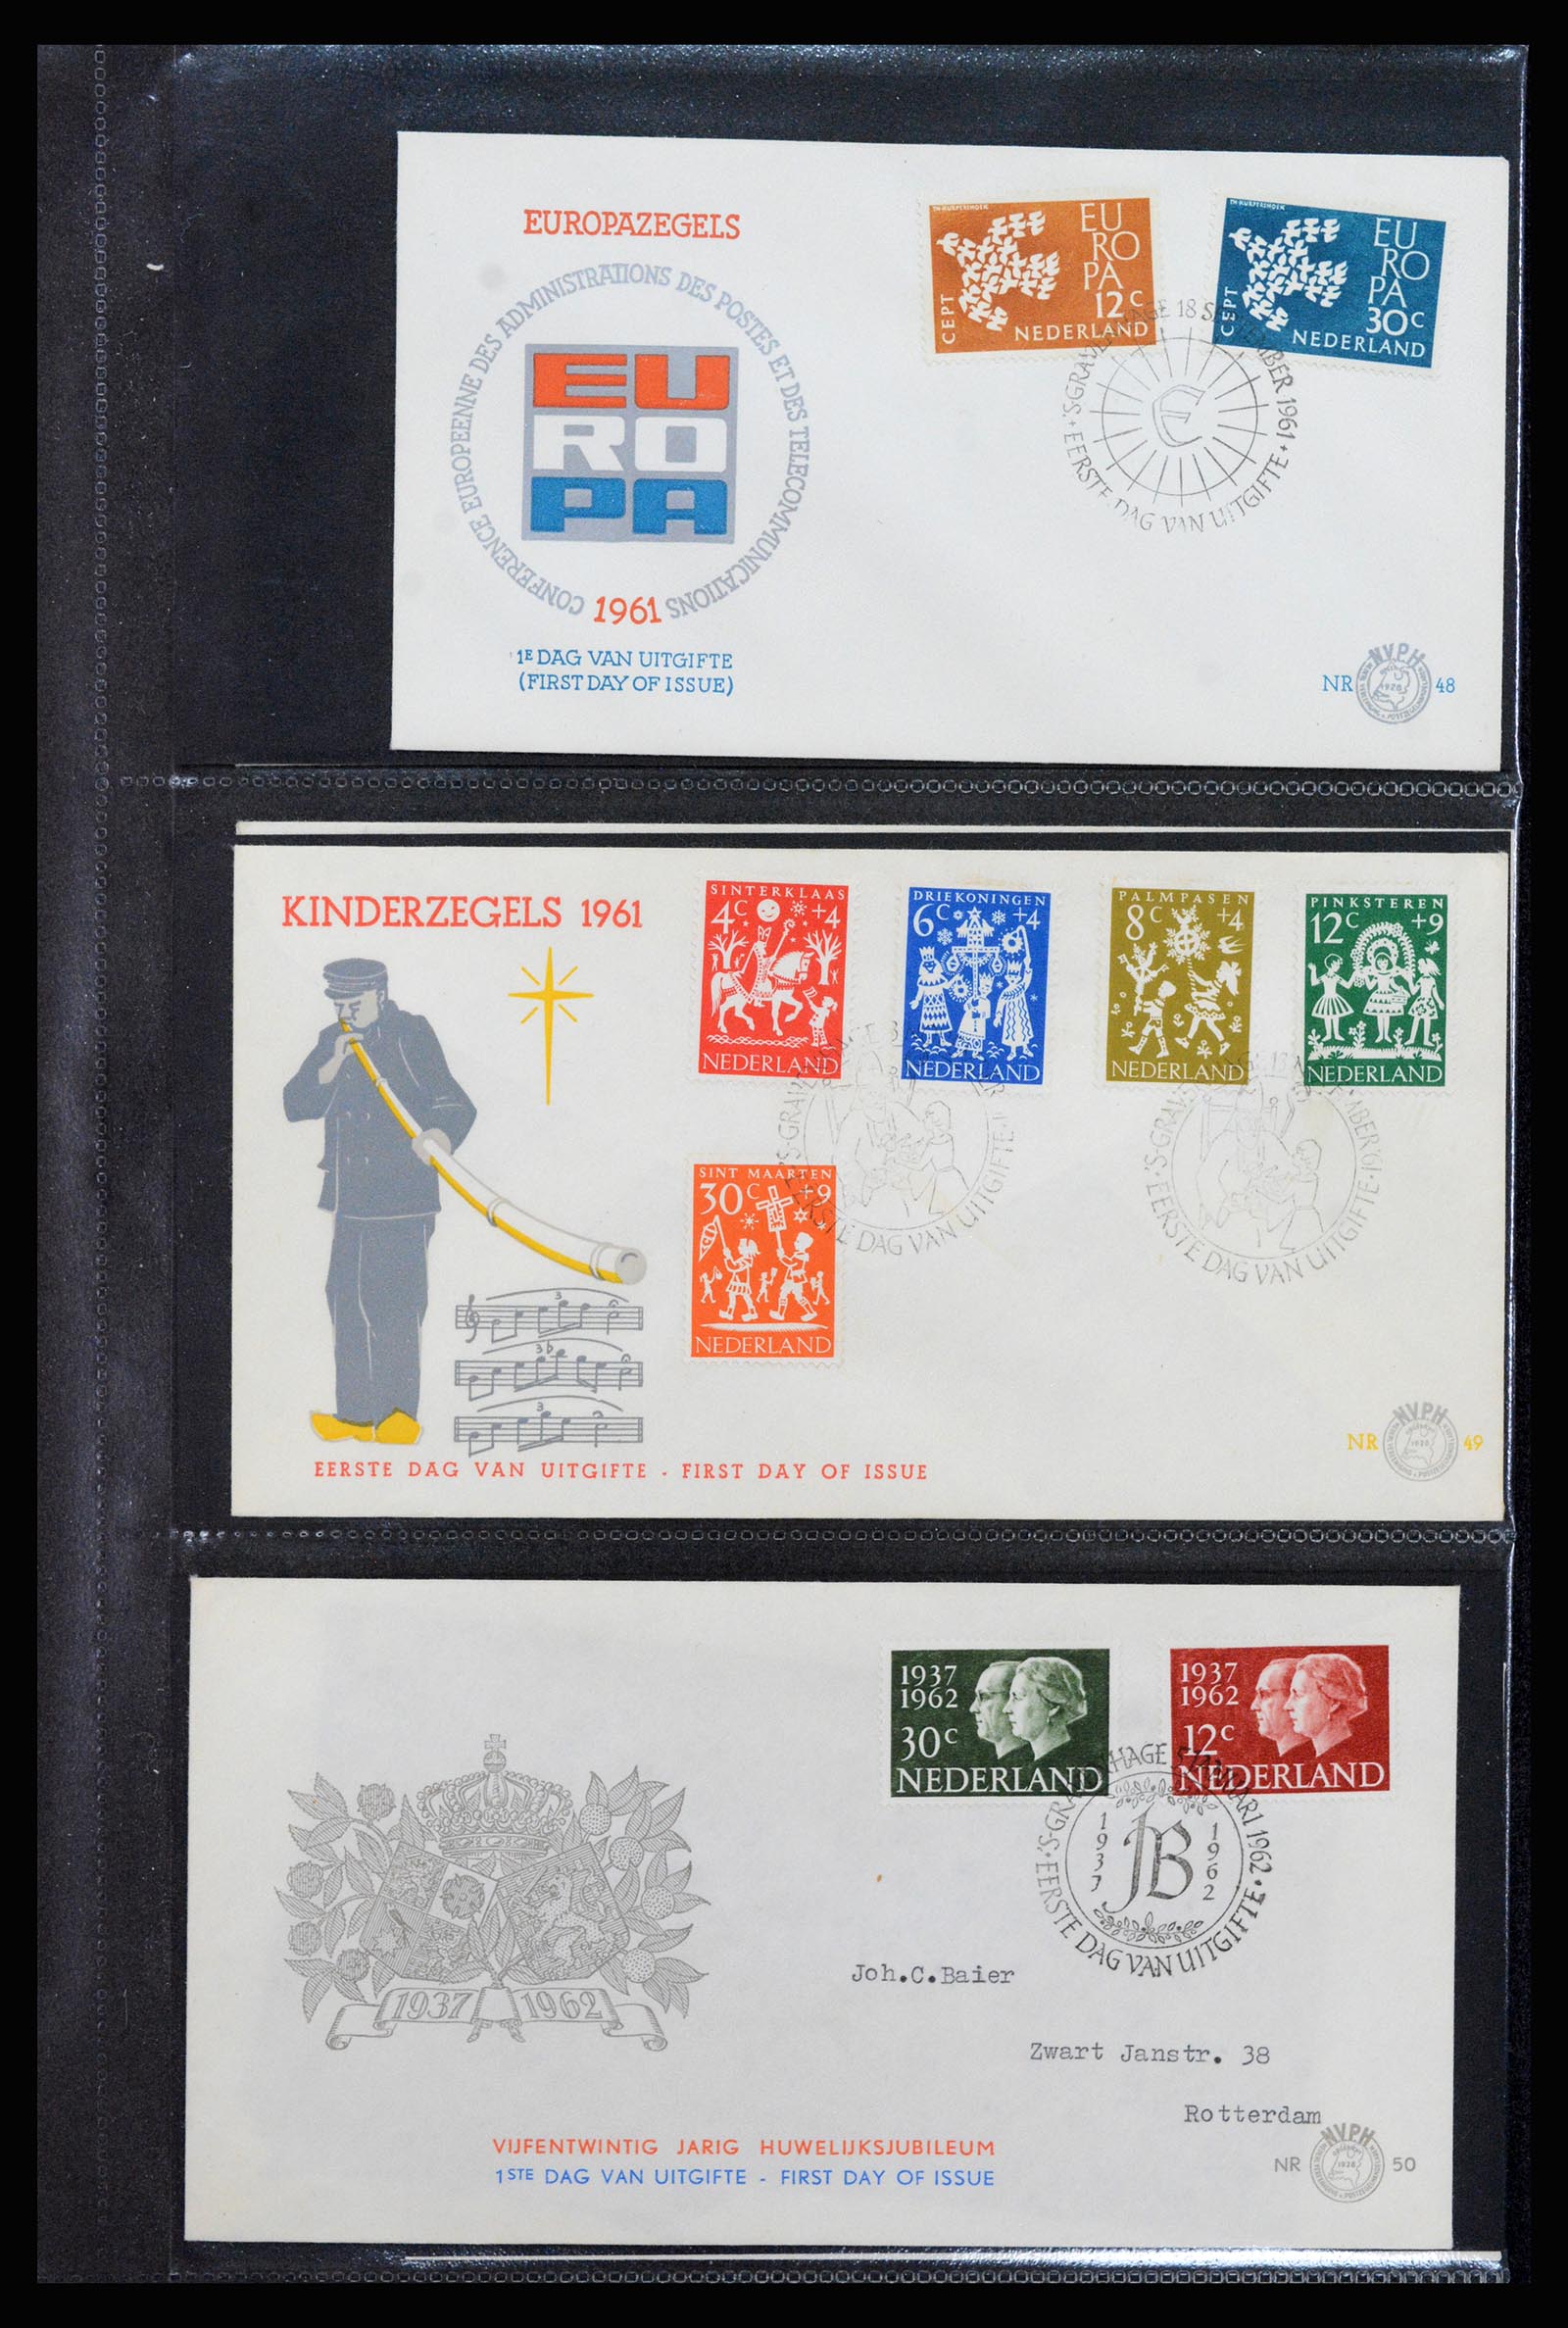 37264 017 - Stamp collection 37264 Netherlands FDC's 1950-1975.